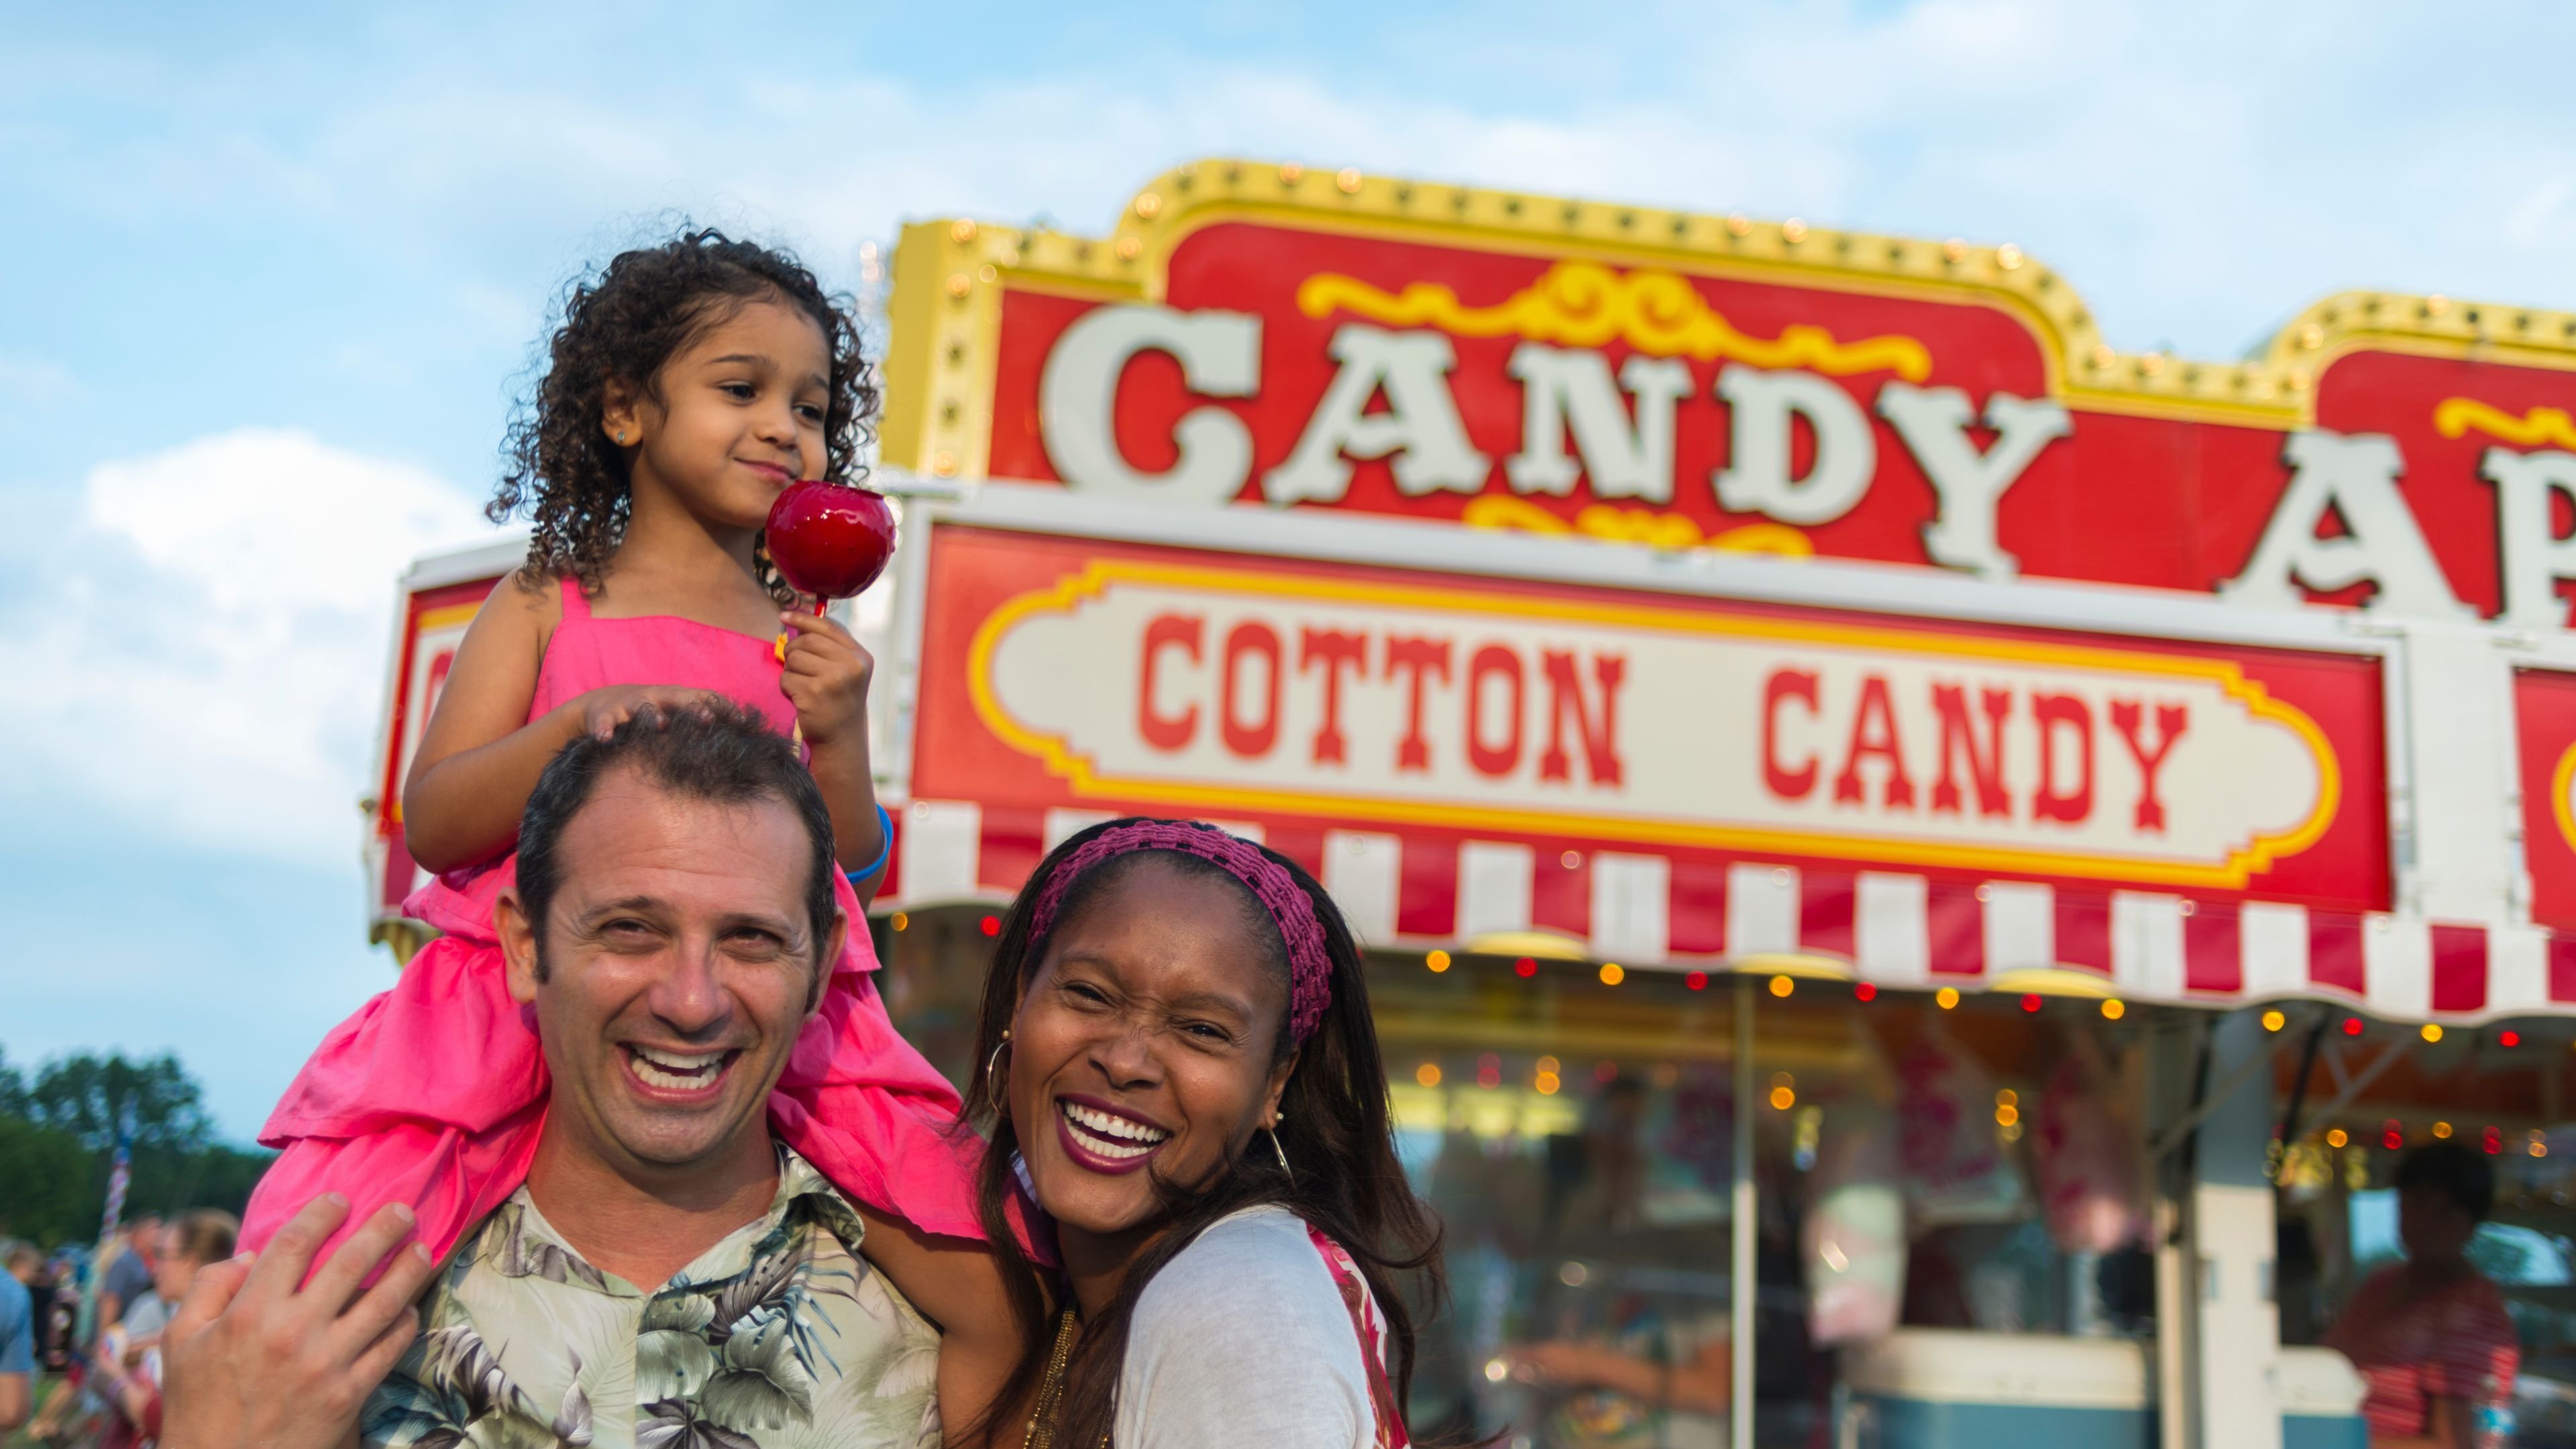 Fun awaits you on the boardwalk with rides, games, surf, and sand.